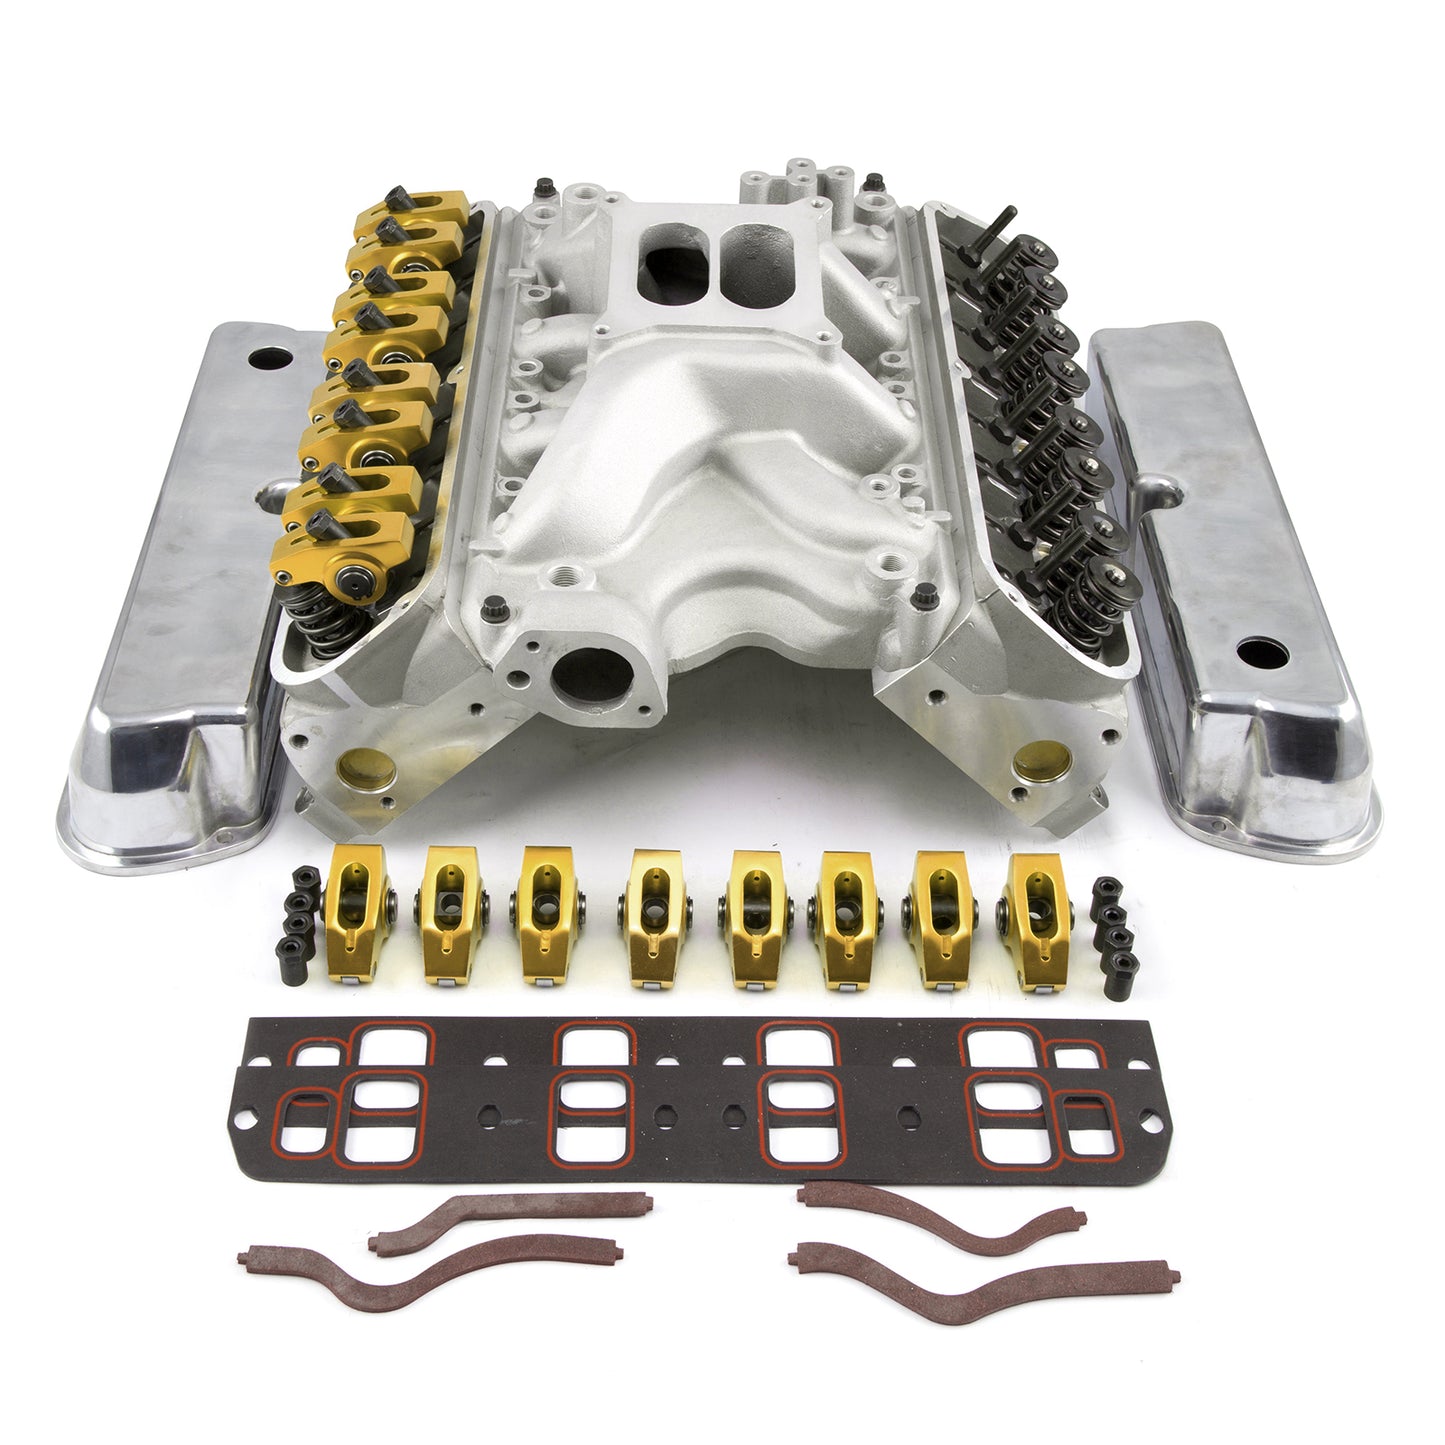 Speedmaster PCE435.1031 Fits Ford 351W Windsor Hyd FT 190cc Cylinder Head Top End Engine Combo Kit